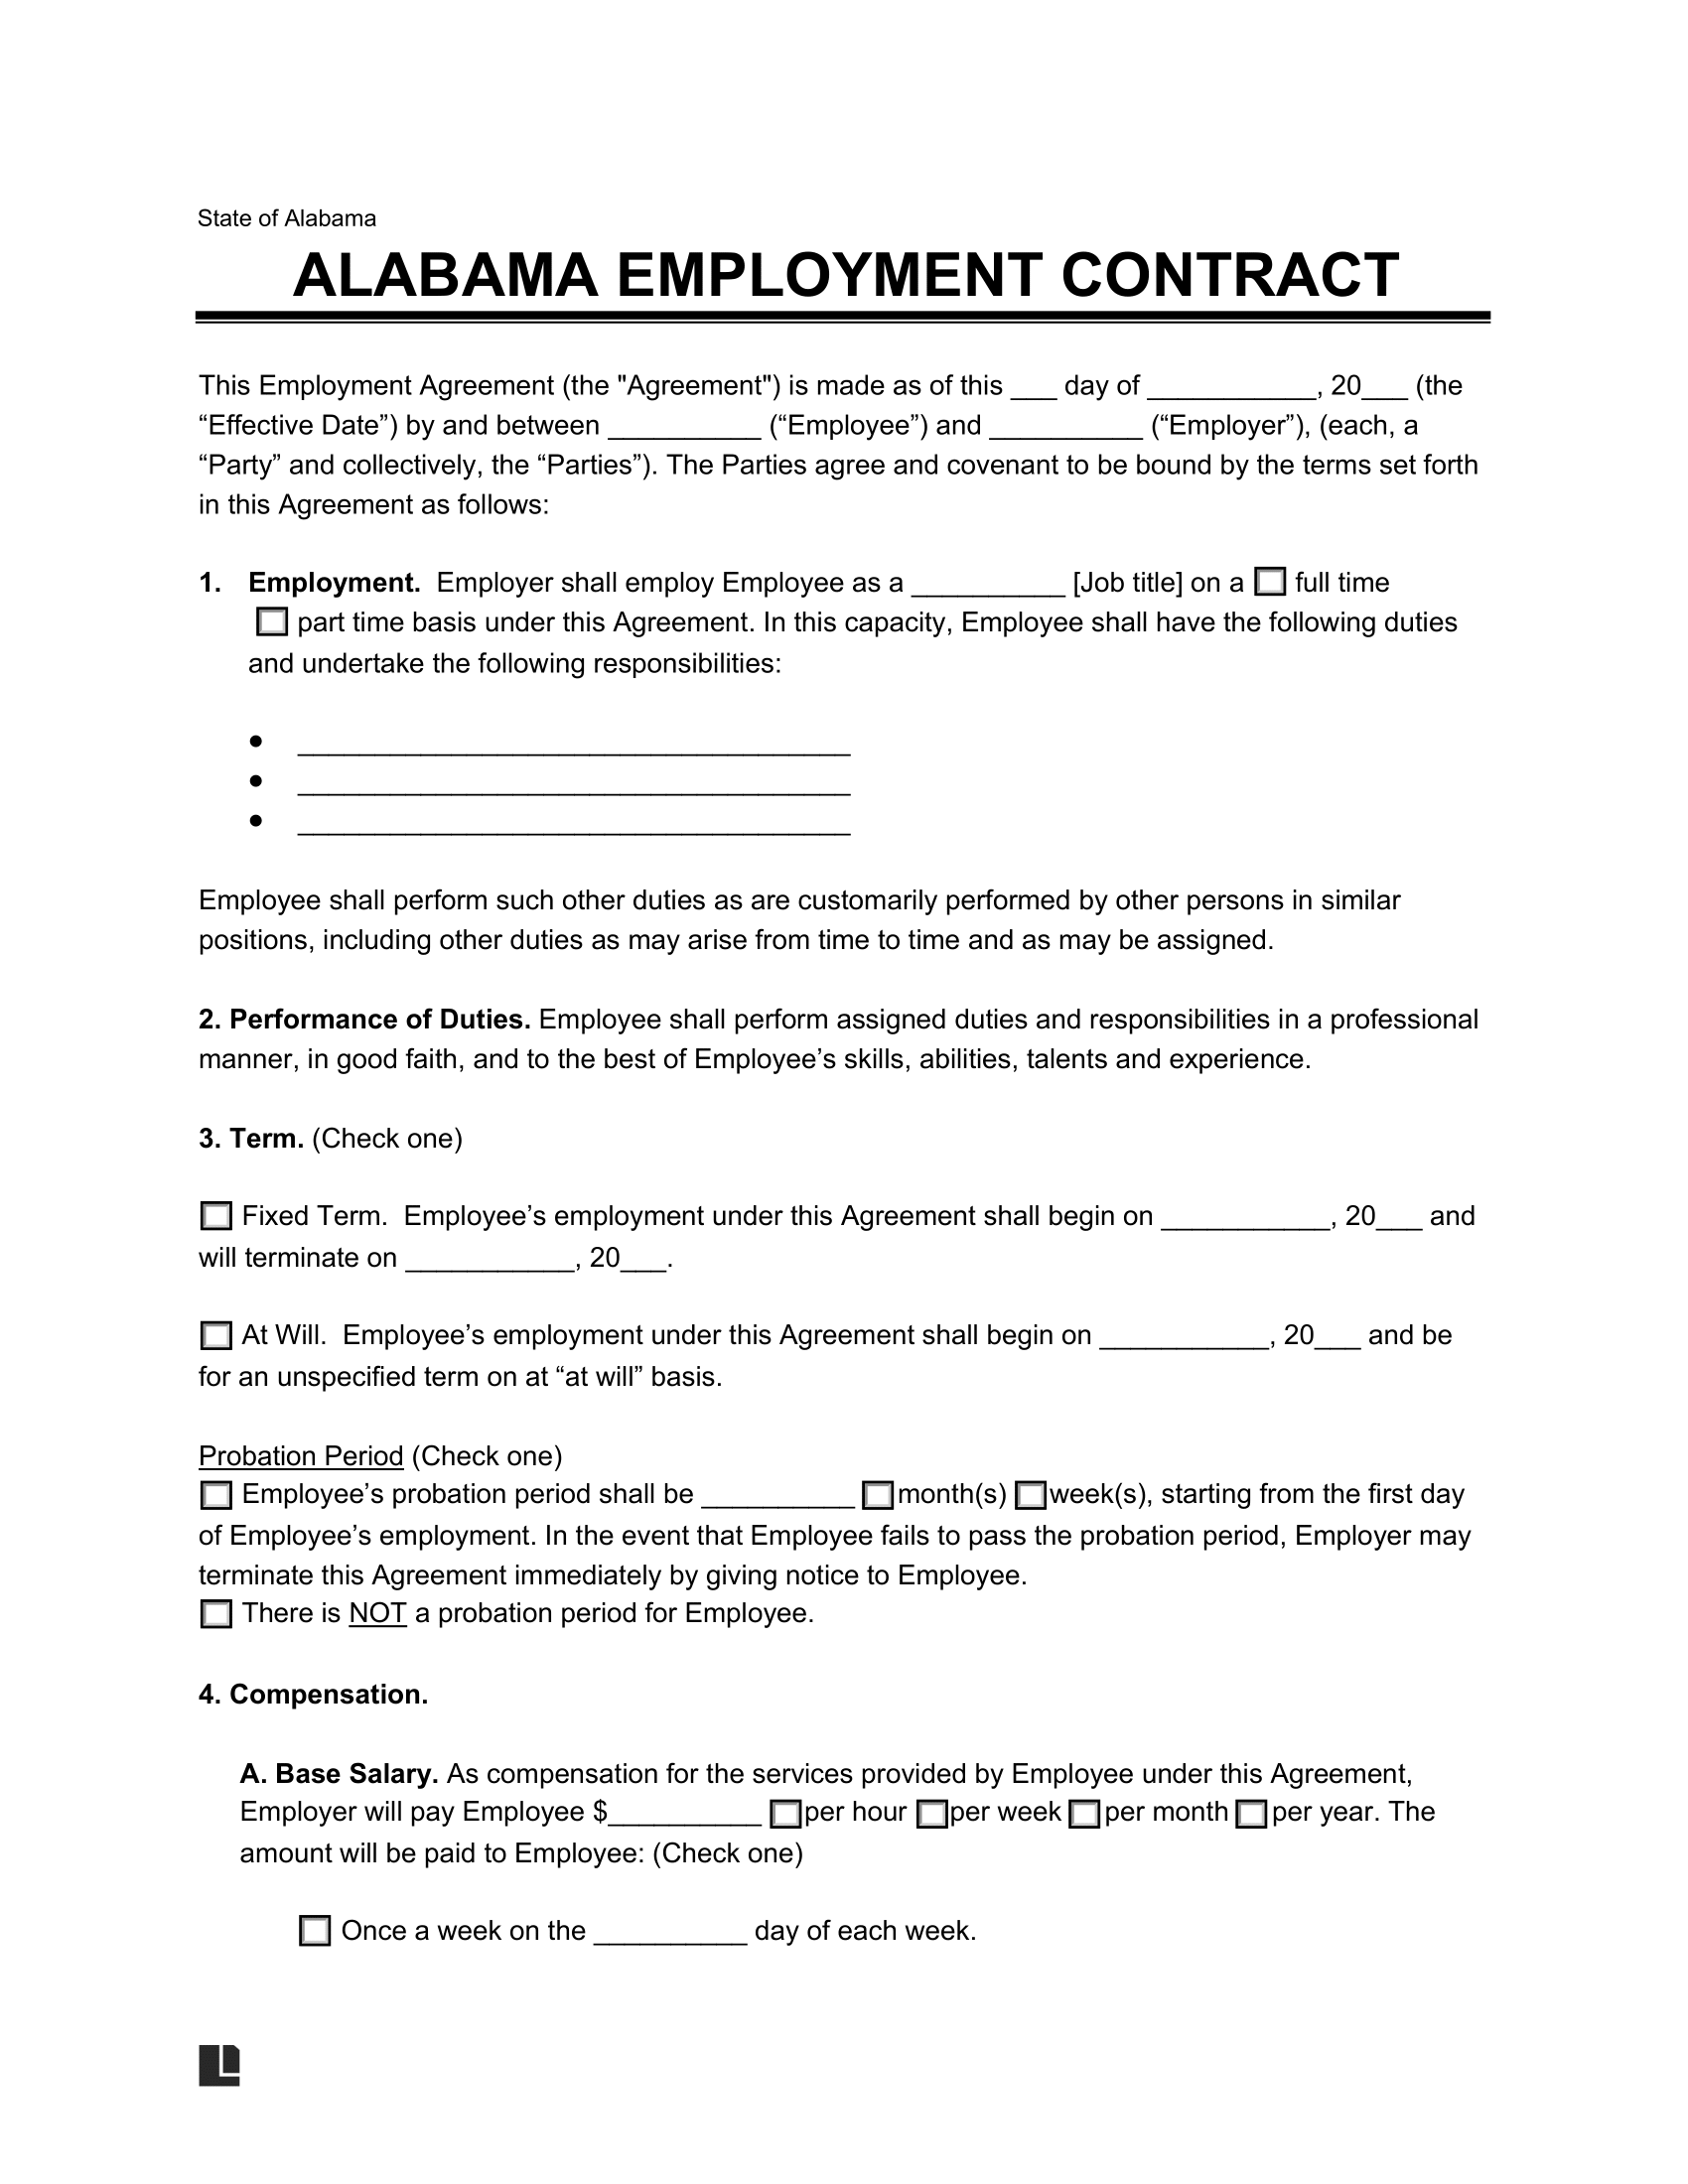 Alabama Employment Contract Template